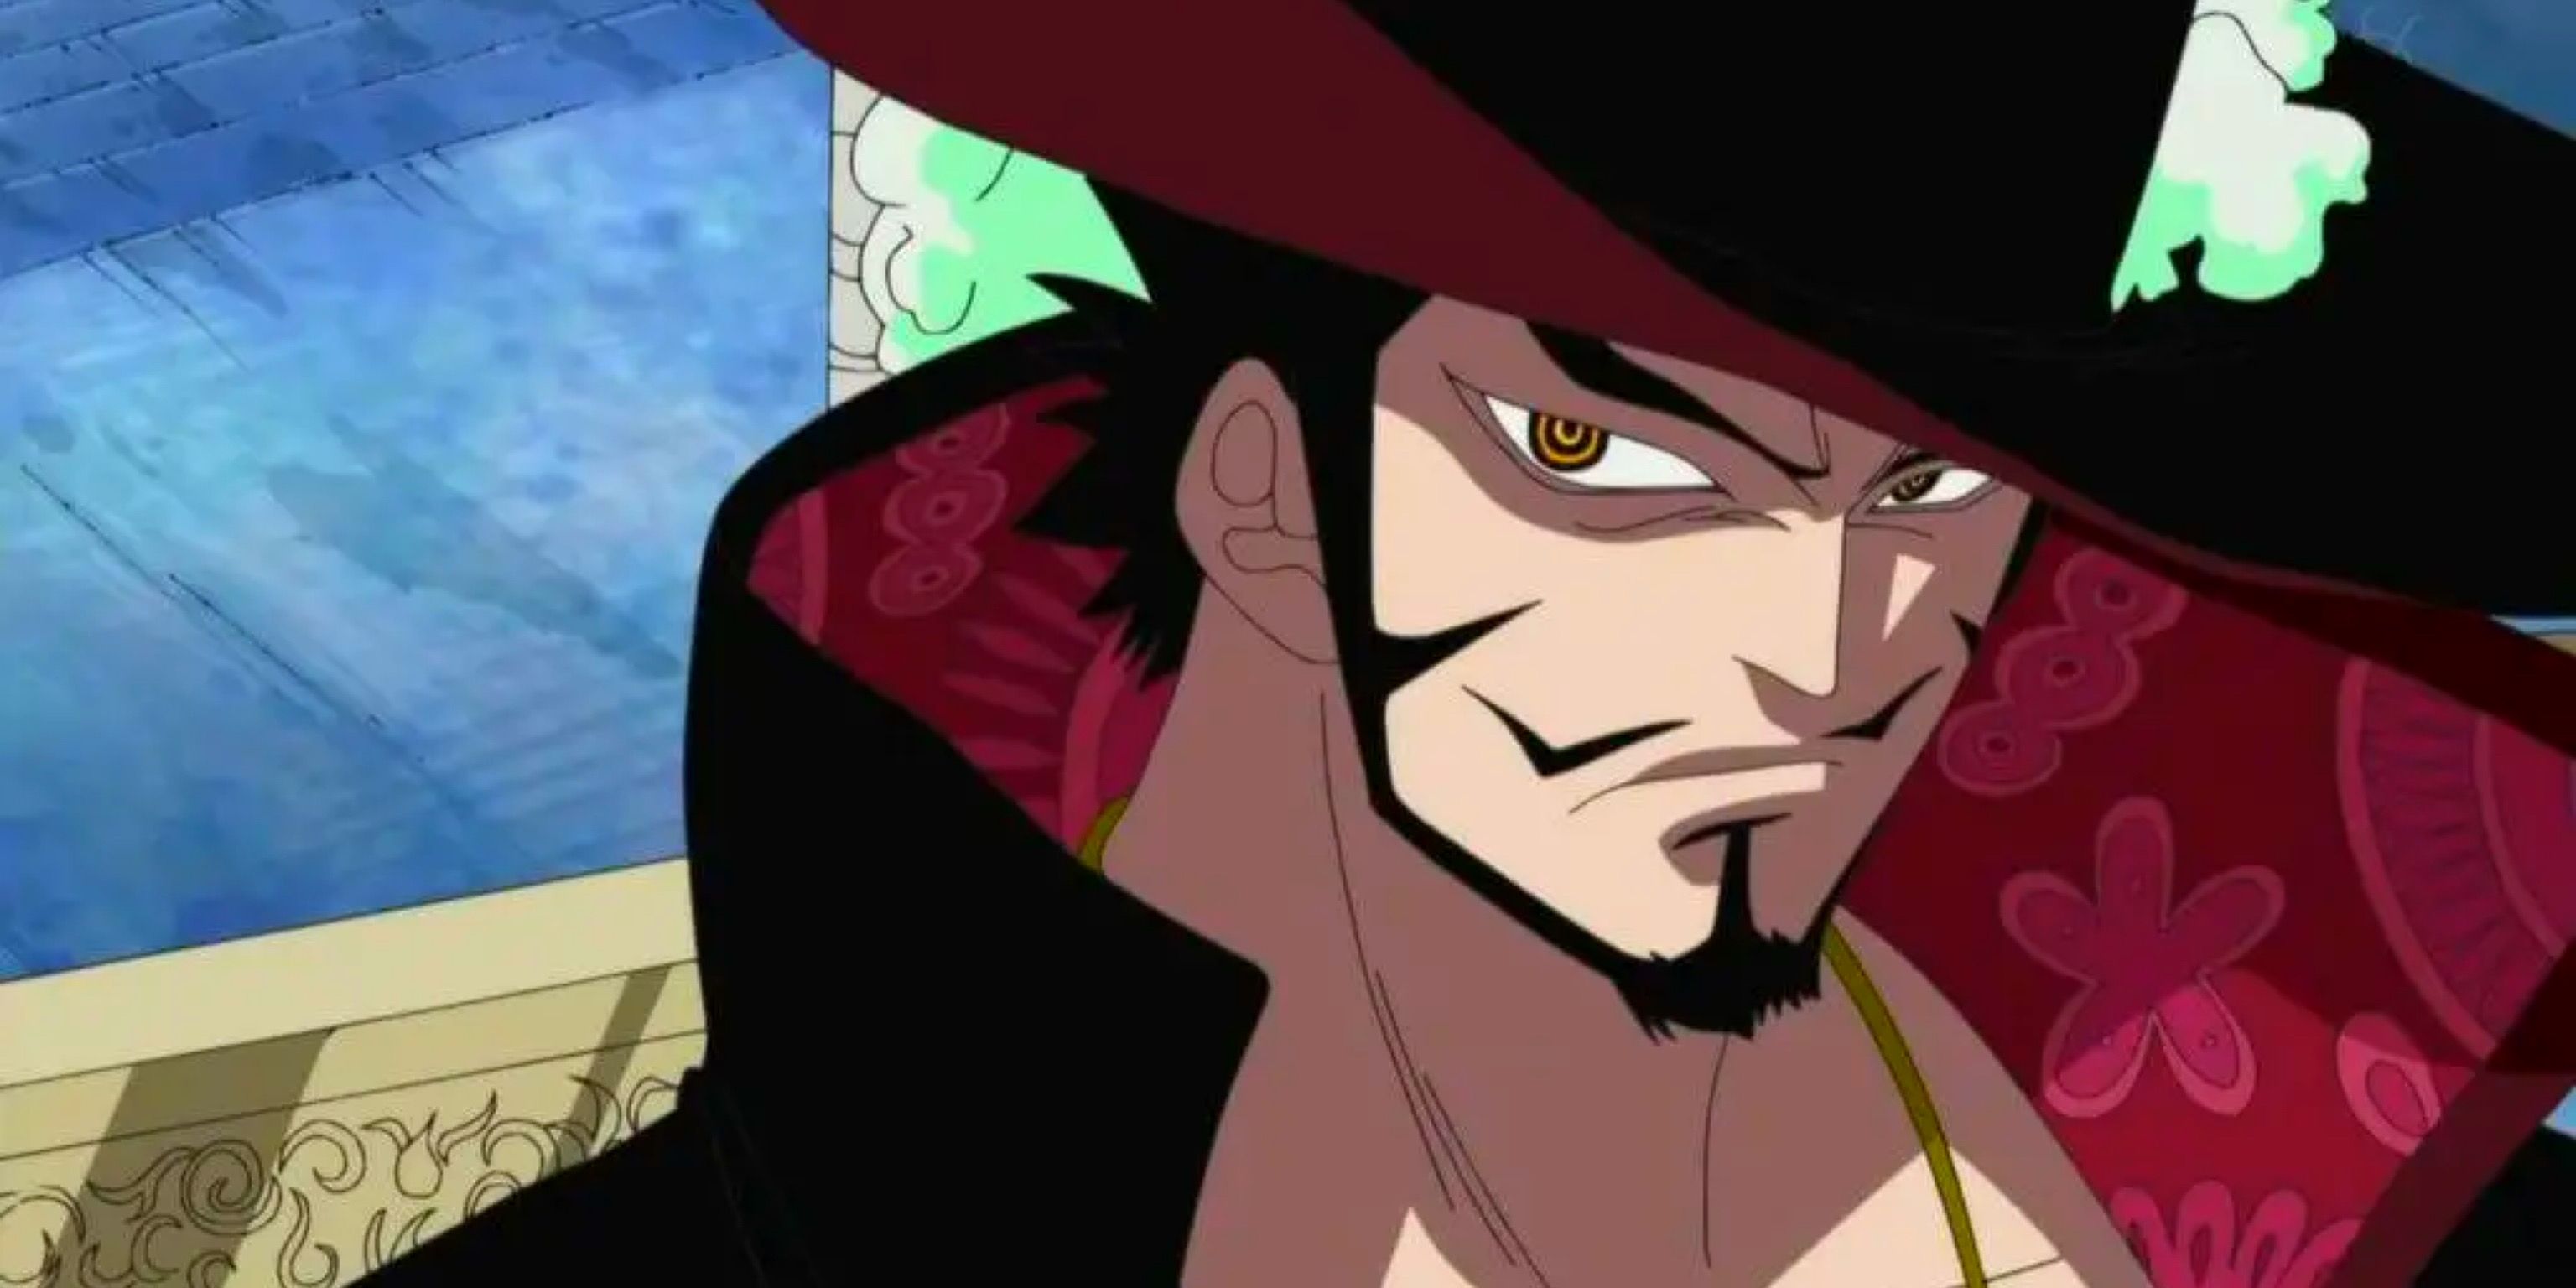 A close-up of Dracule Mihawk with a serious expression in the One Piece anime